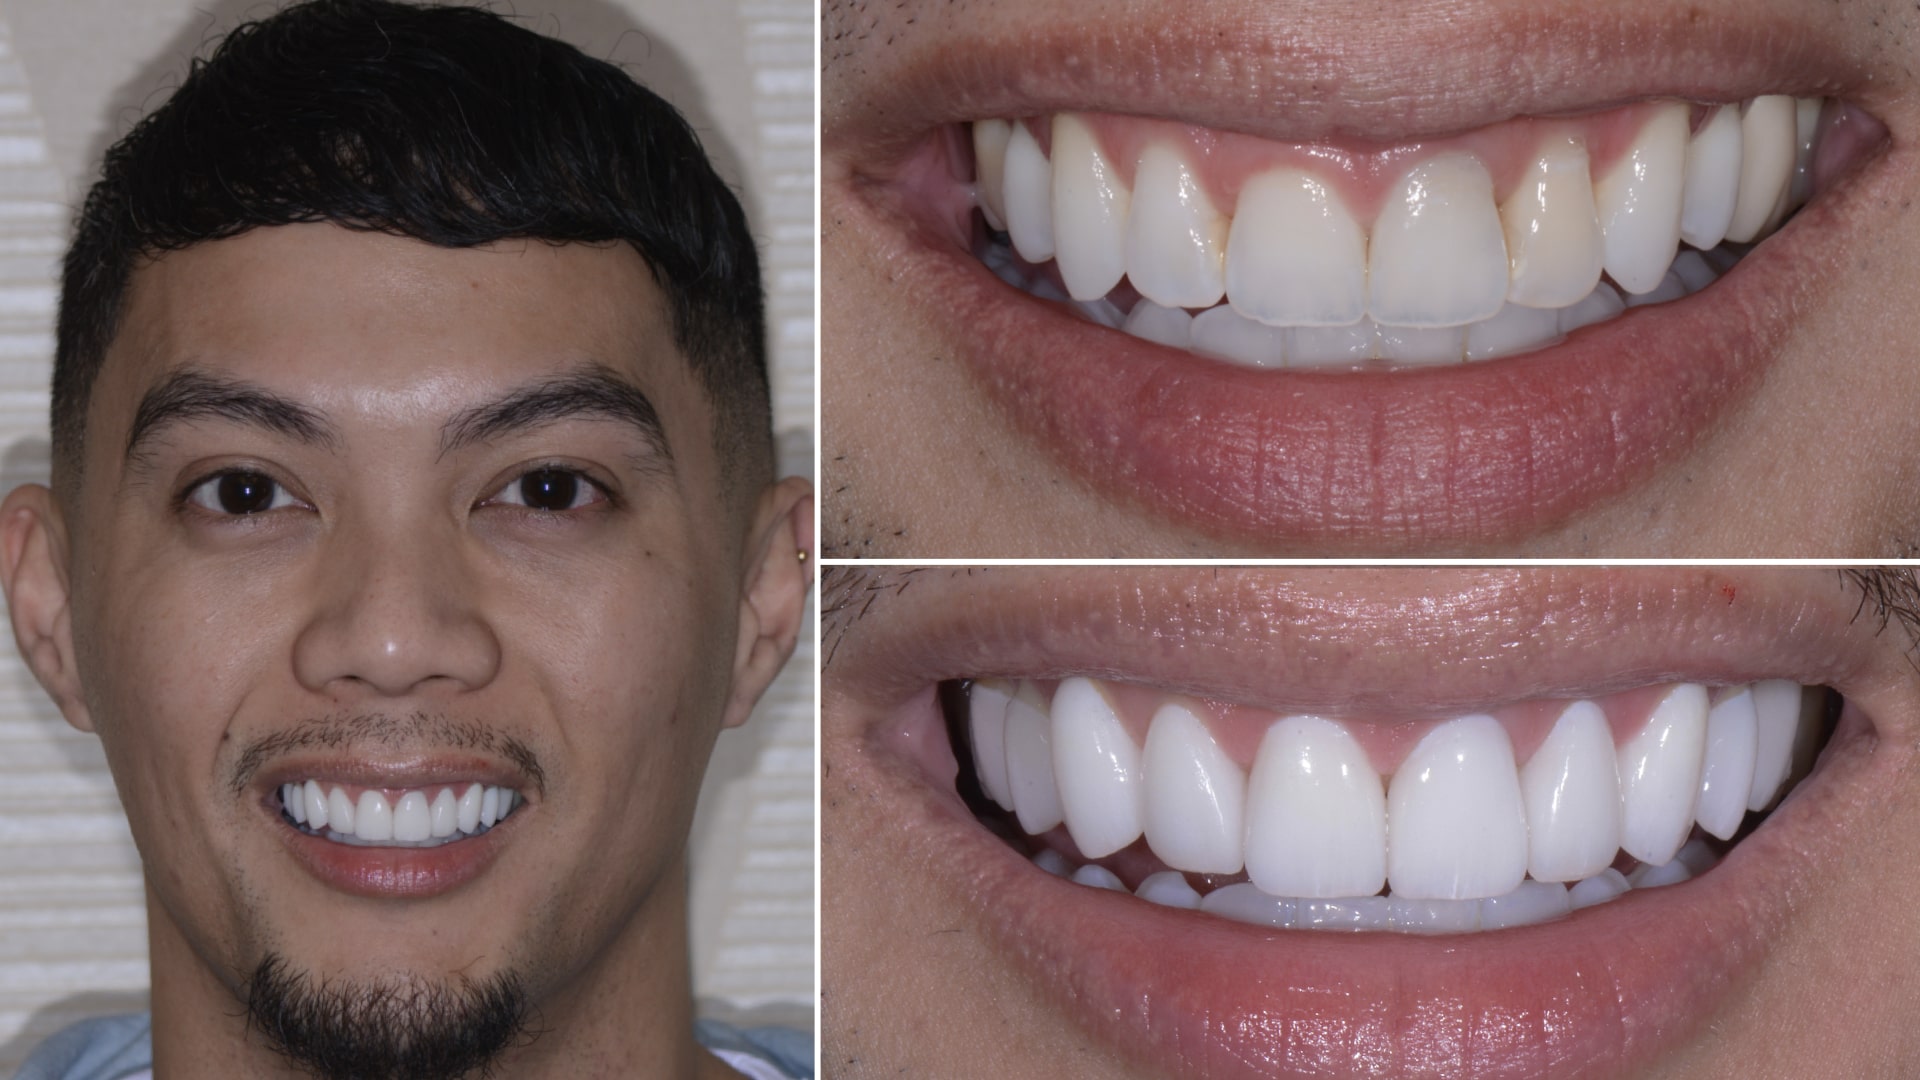 Younger man's smile before and after cosmetic dentistry